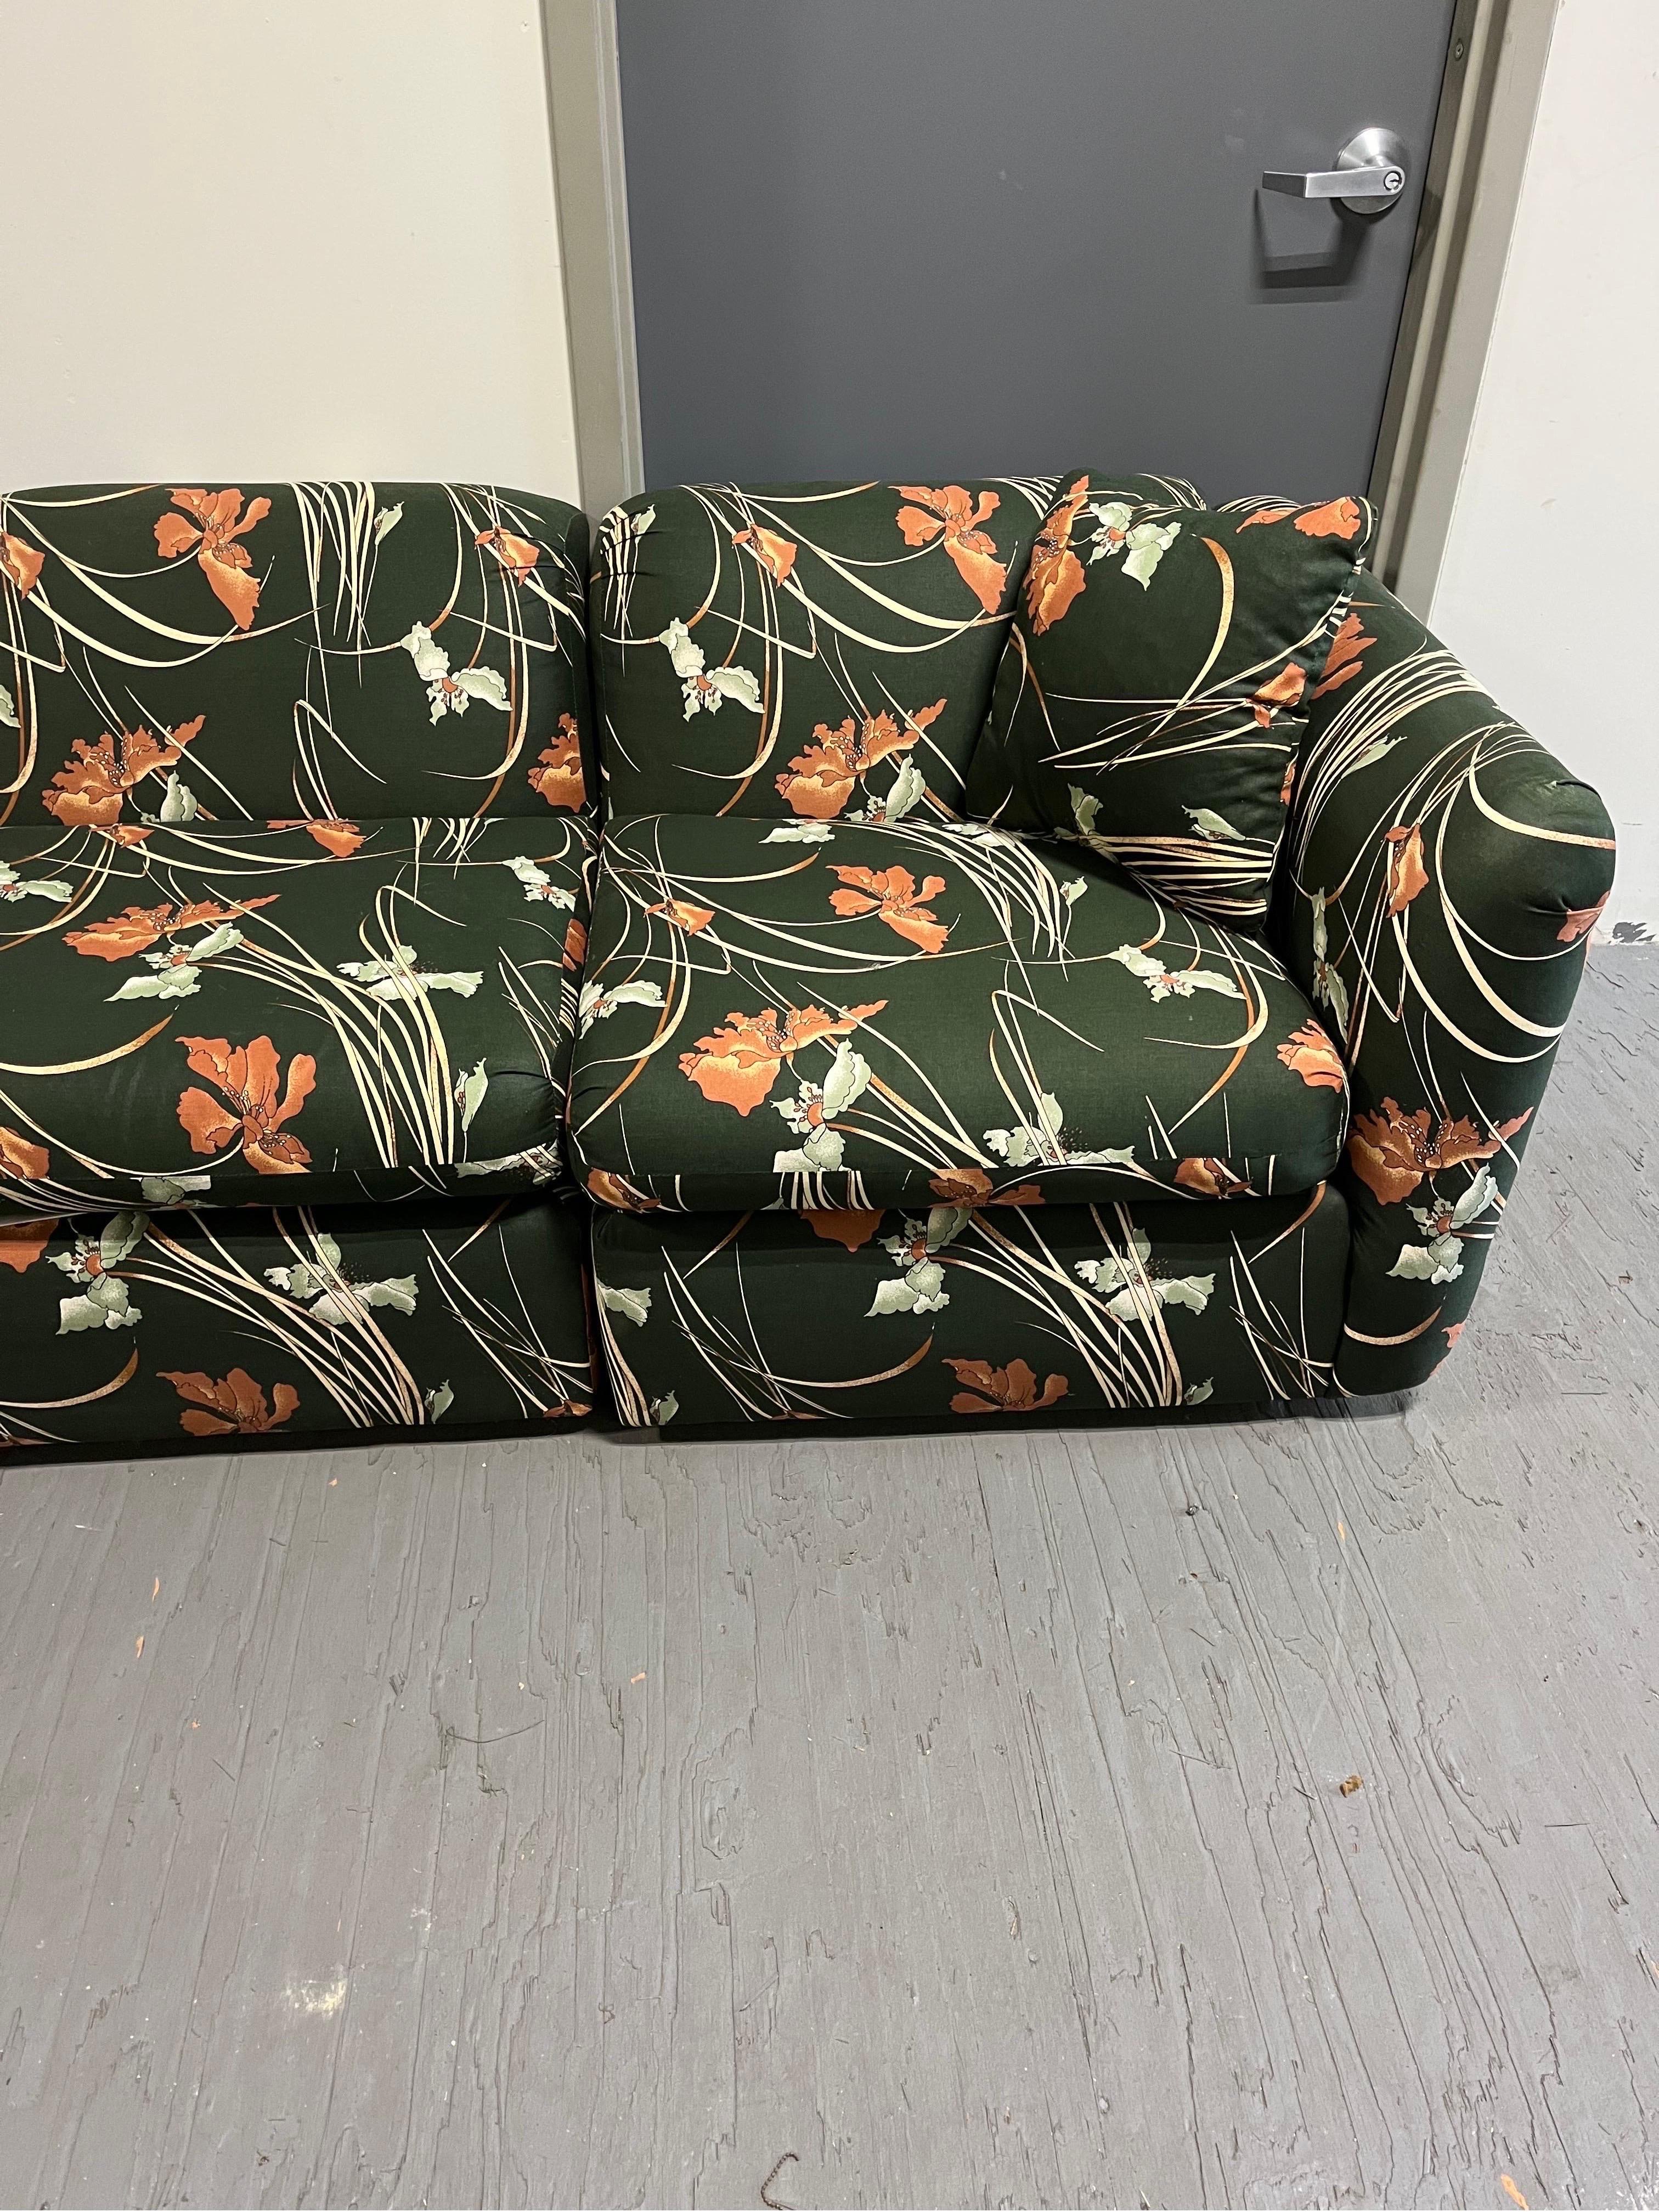 Seven piece floral sectional sofa. Three corner pieces. Five center pieces.
Measurements for each piece are as follows:

Corners: 34